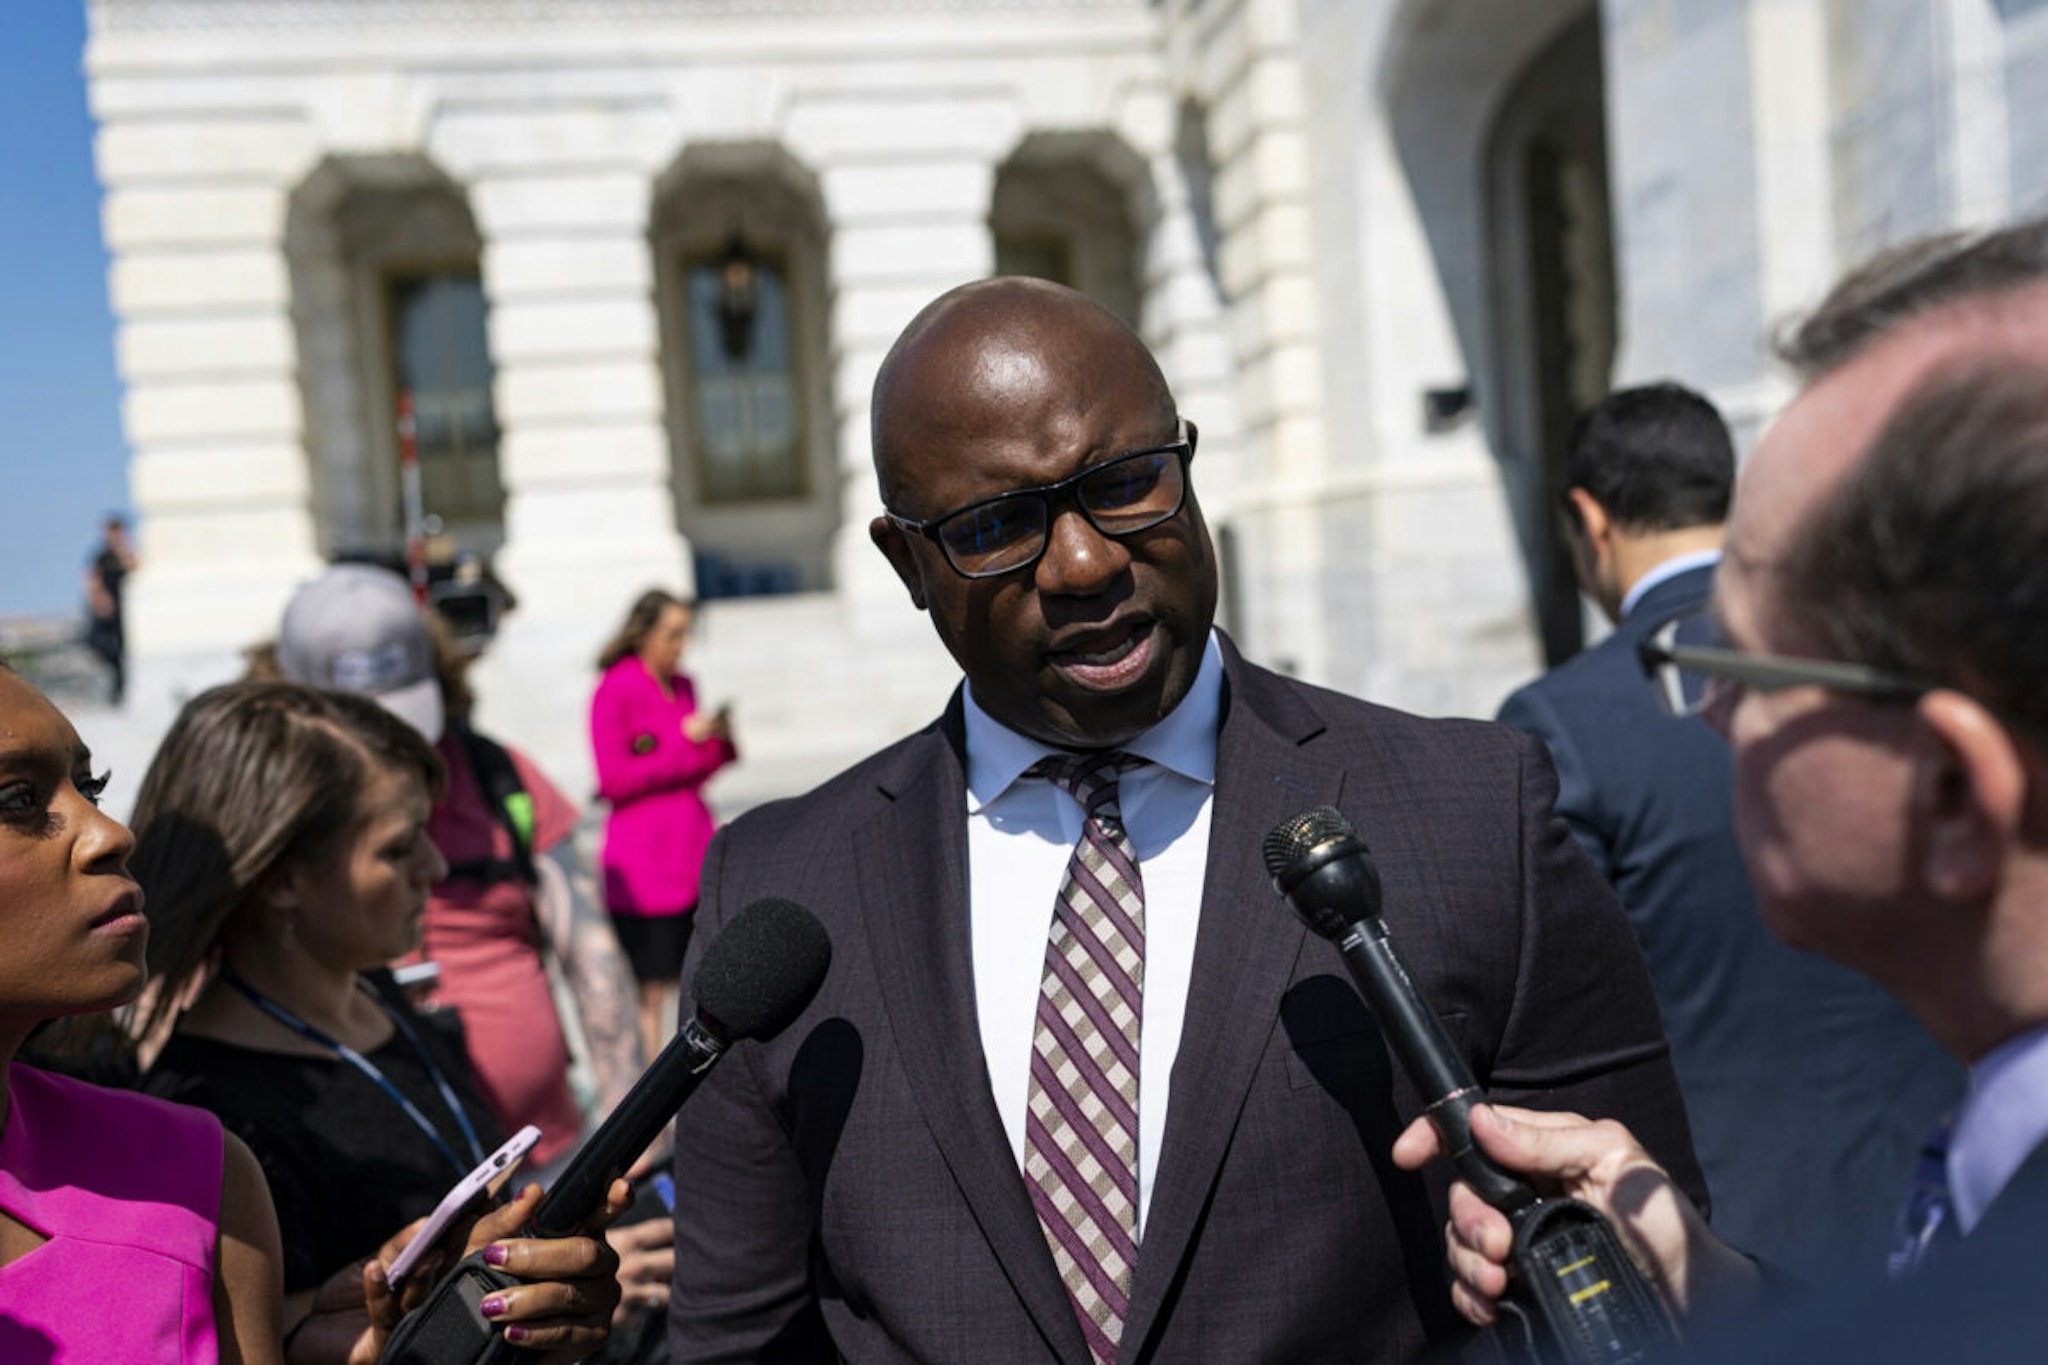 Representative Jamaal Bowman, a Democrat from New York, speaks to members of the media following a vote at the US Capitol in Washington, DC, US, on Thursday, May 25, 2023.